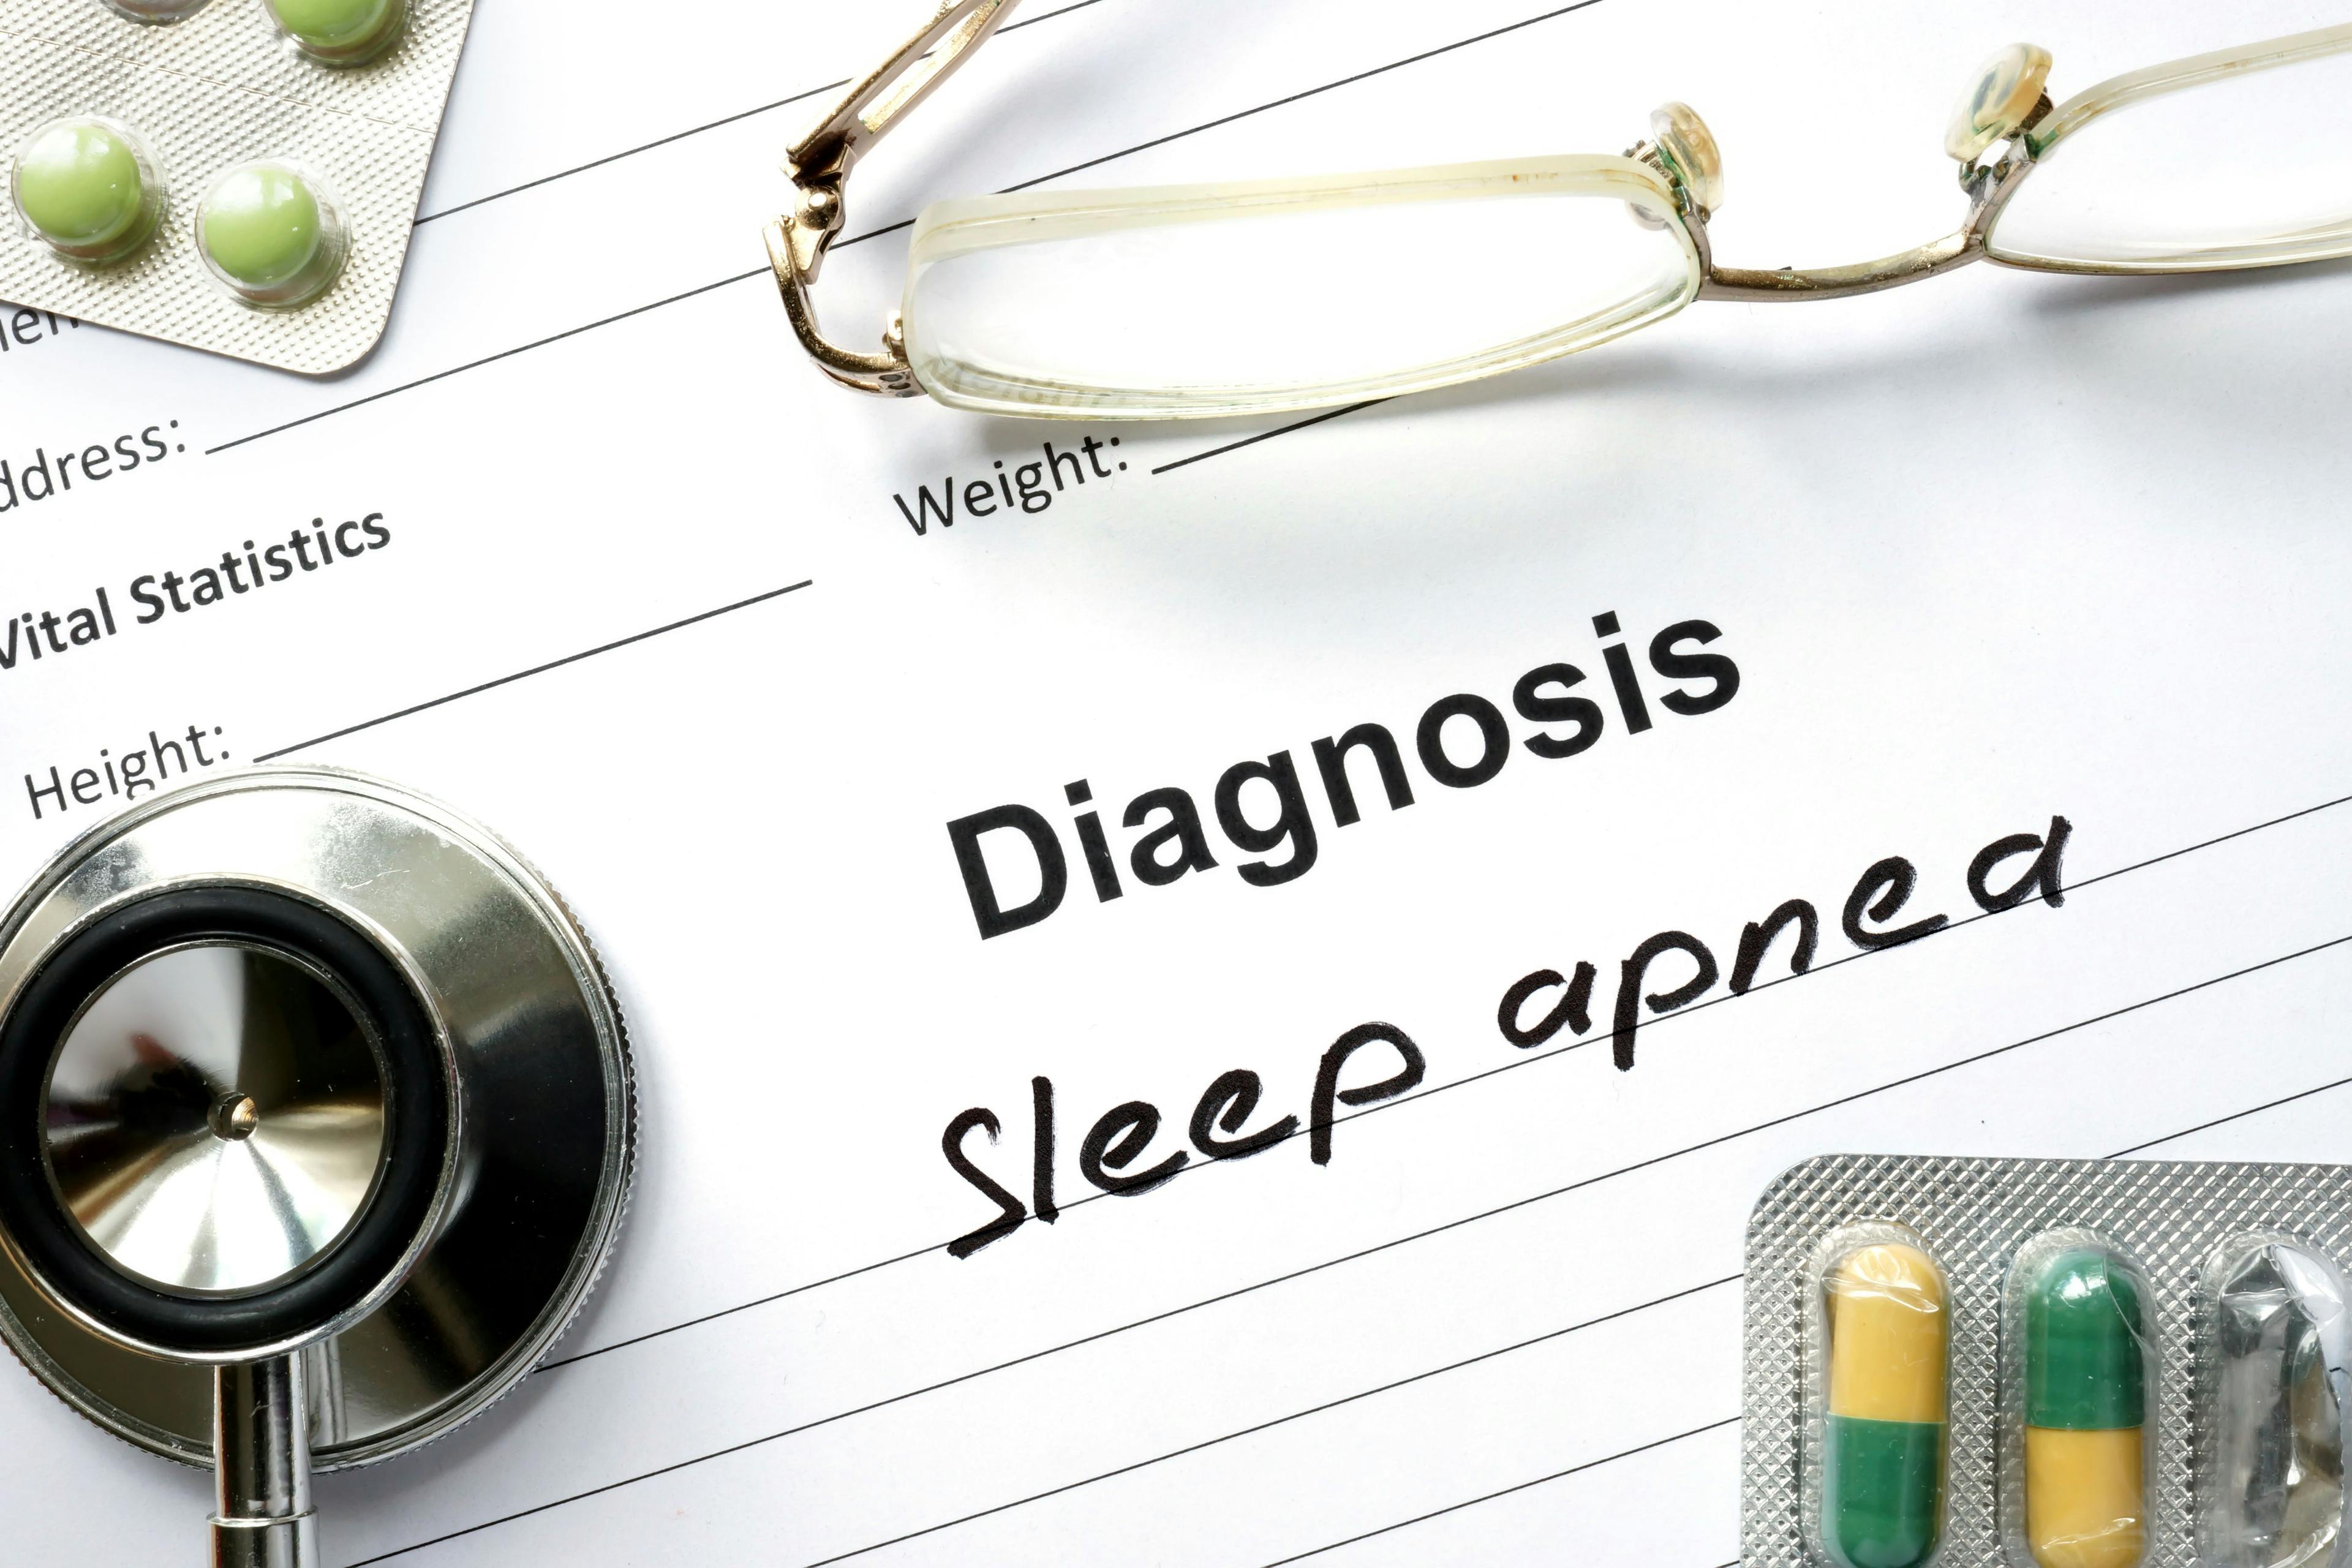  Licensed   FILE #:  87016164  Preview Crop  Find Similar  Expand Image DIMENSIONS 5500 x 3667px FILE TYPE JPEG CATEGORY Disease LICENSE TYPE Standard or Extended Diagnostic form with diagnosis Sleep apnea and pills. | Image credit: © - Vitalii Vodolazskyi © - stock.adobe.com